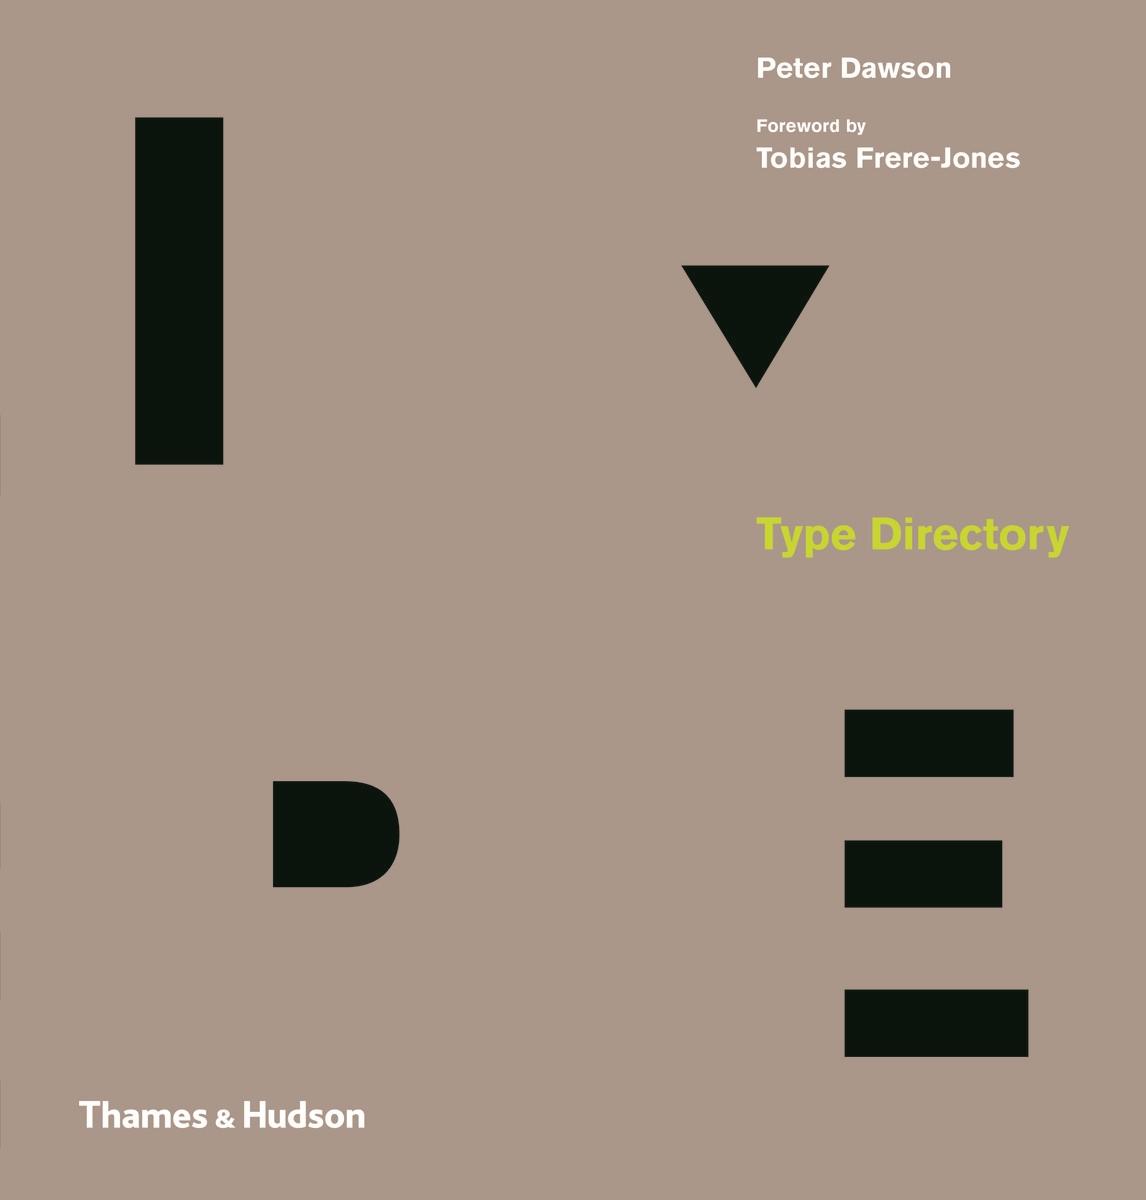 More information about "Type Directory"